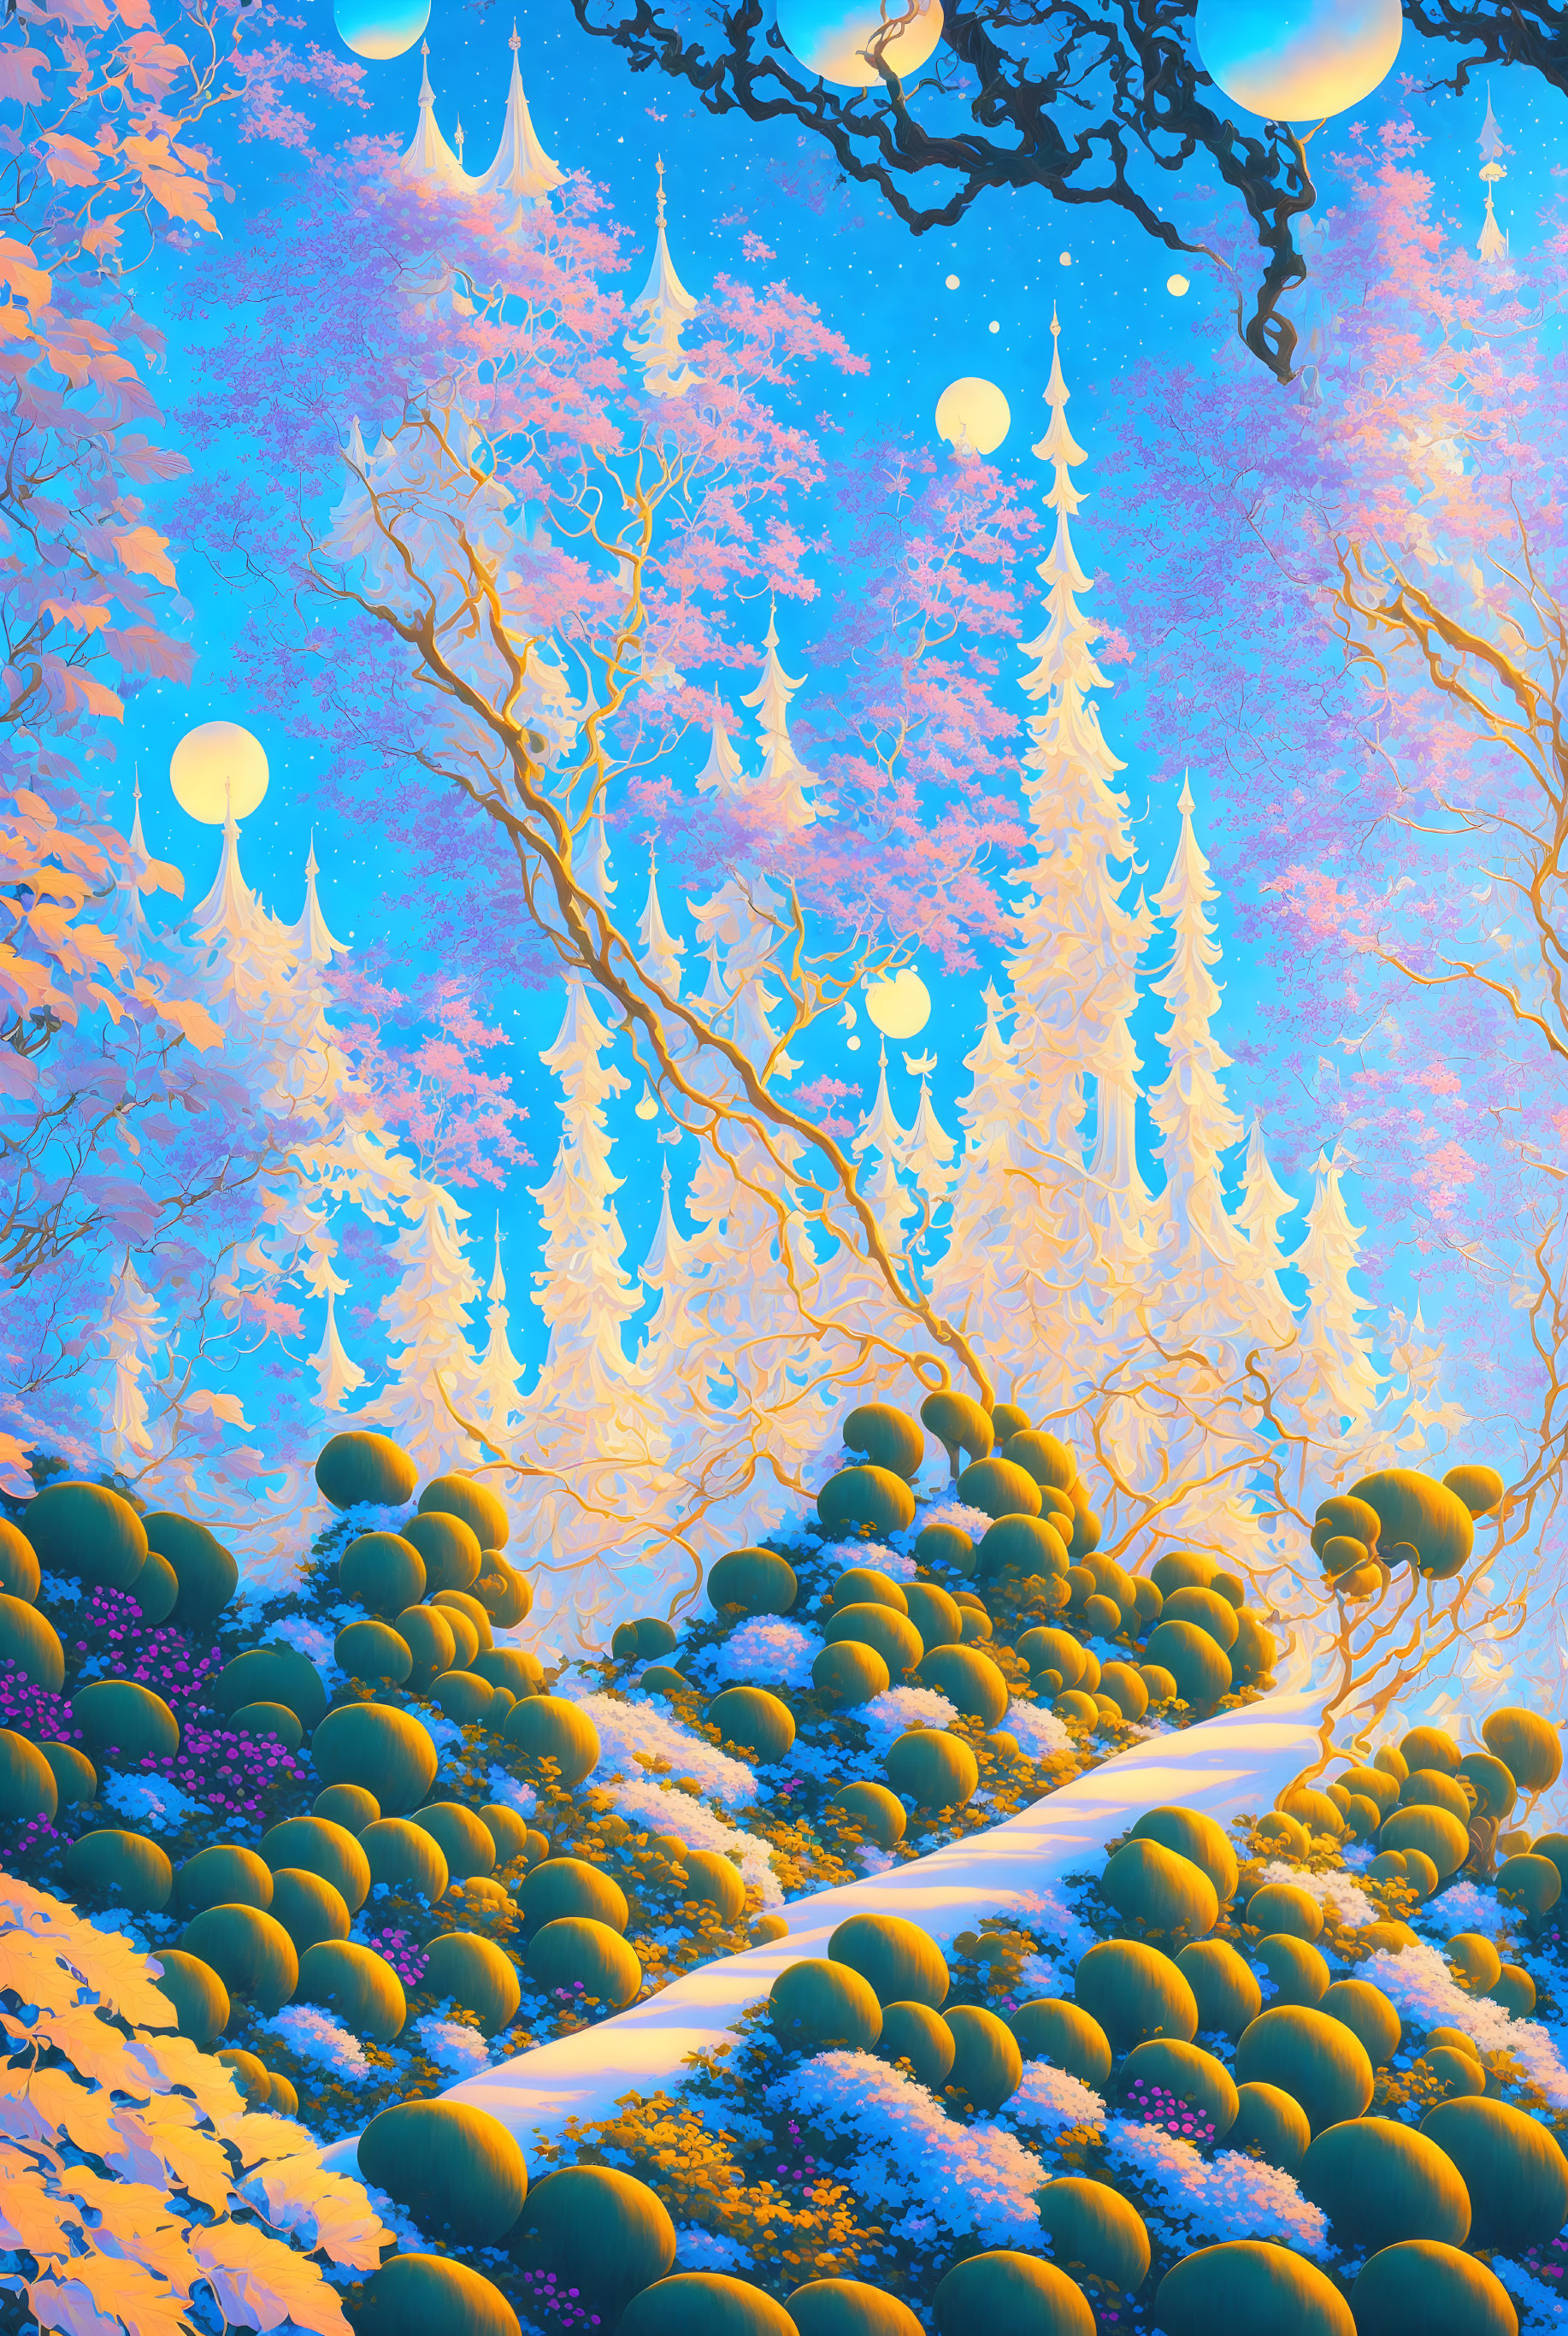 Vibrant Blue and Pink Forest with Glowing Orbs